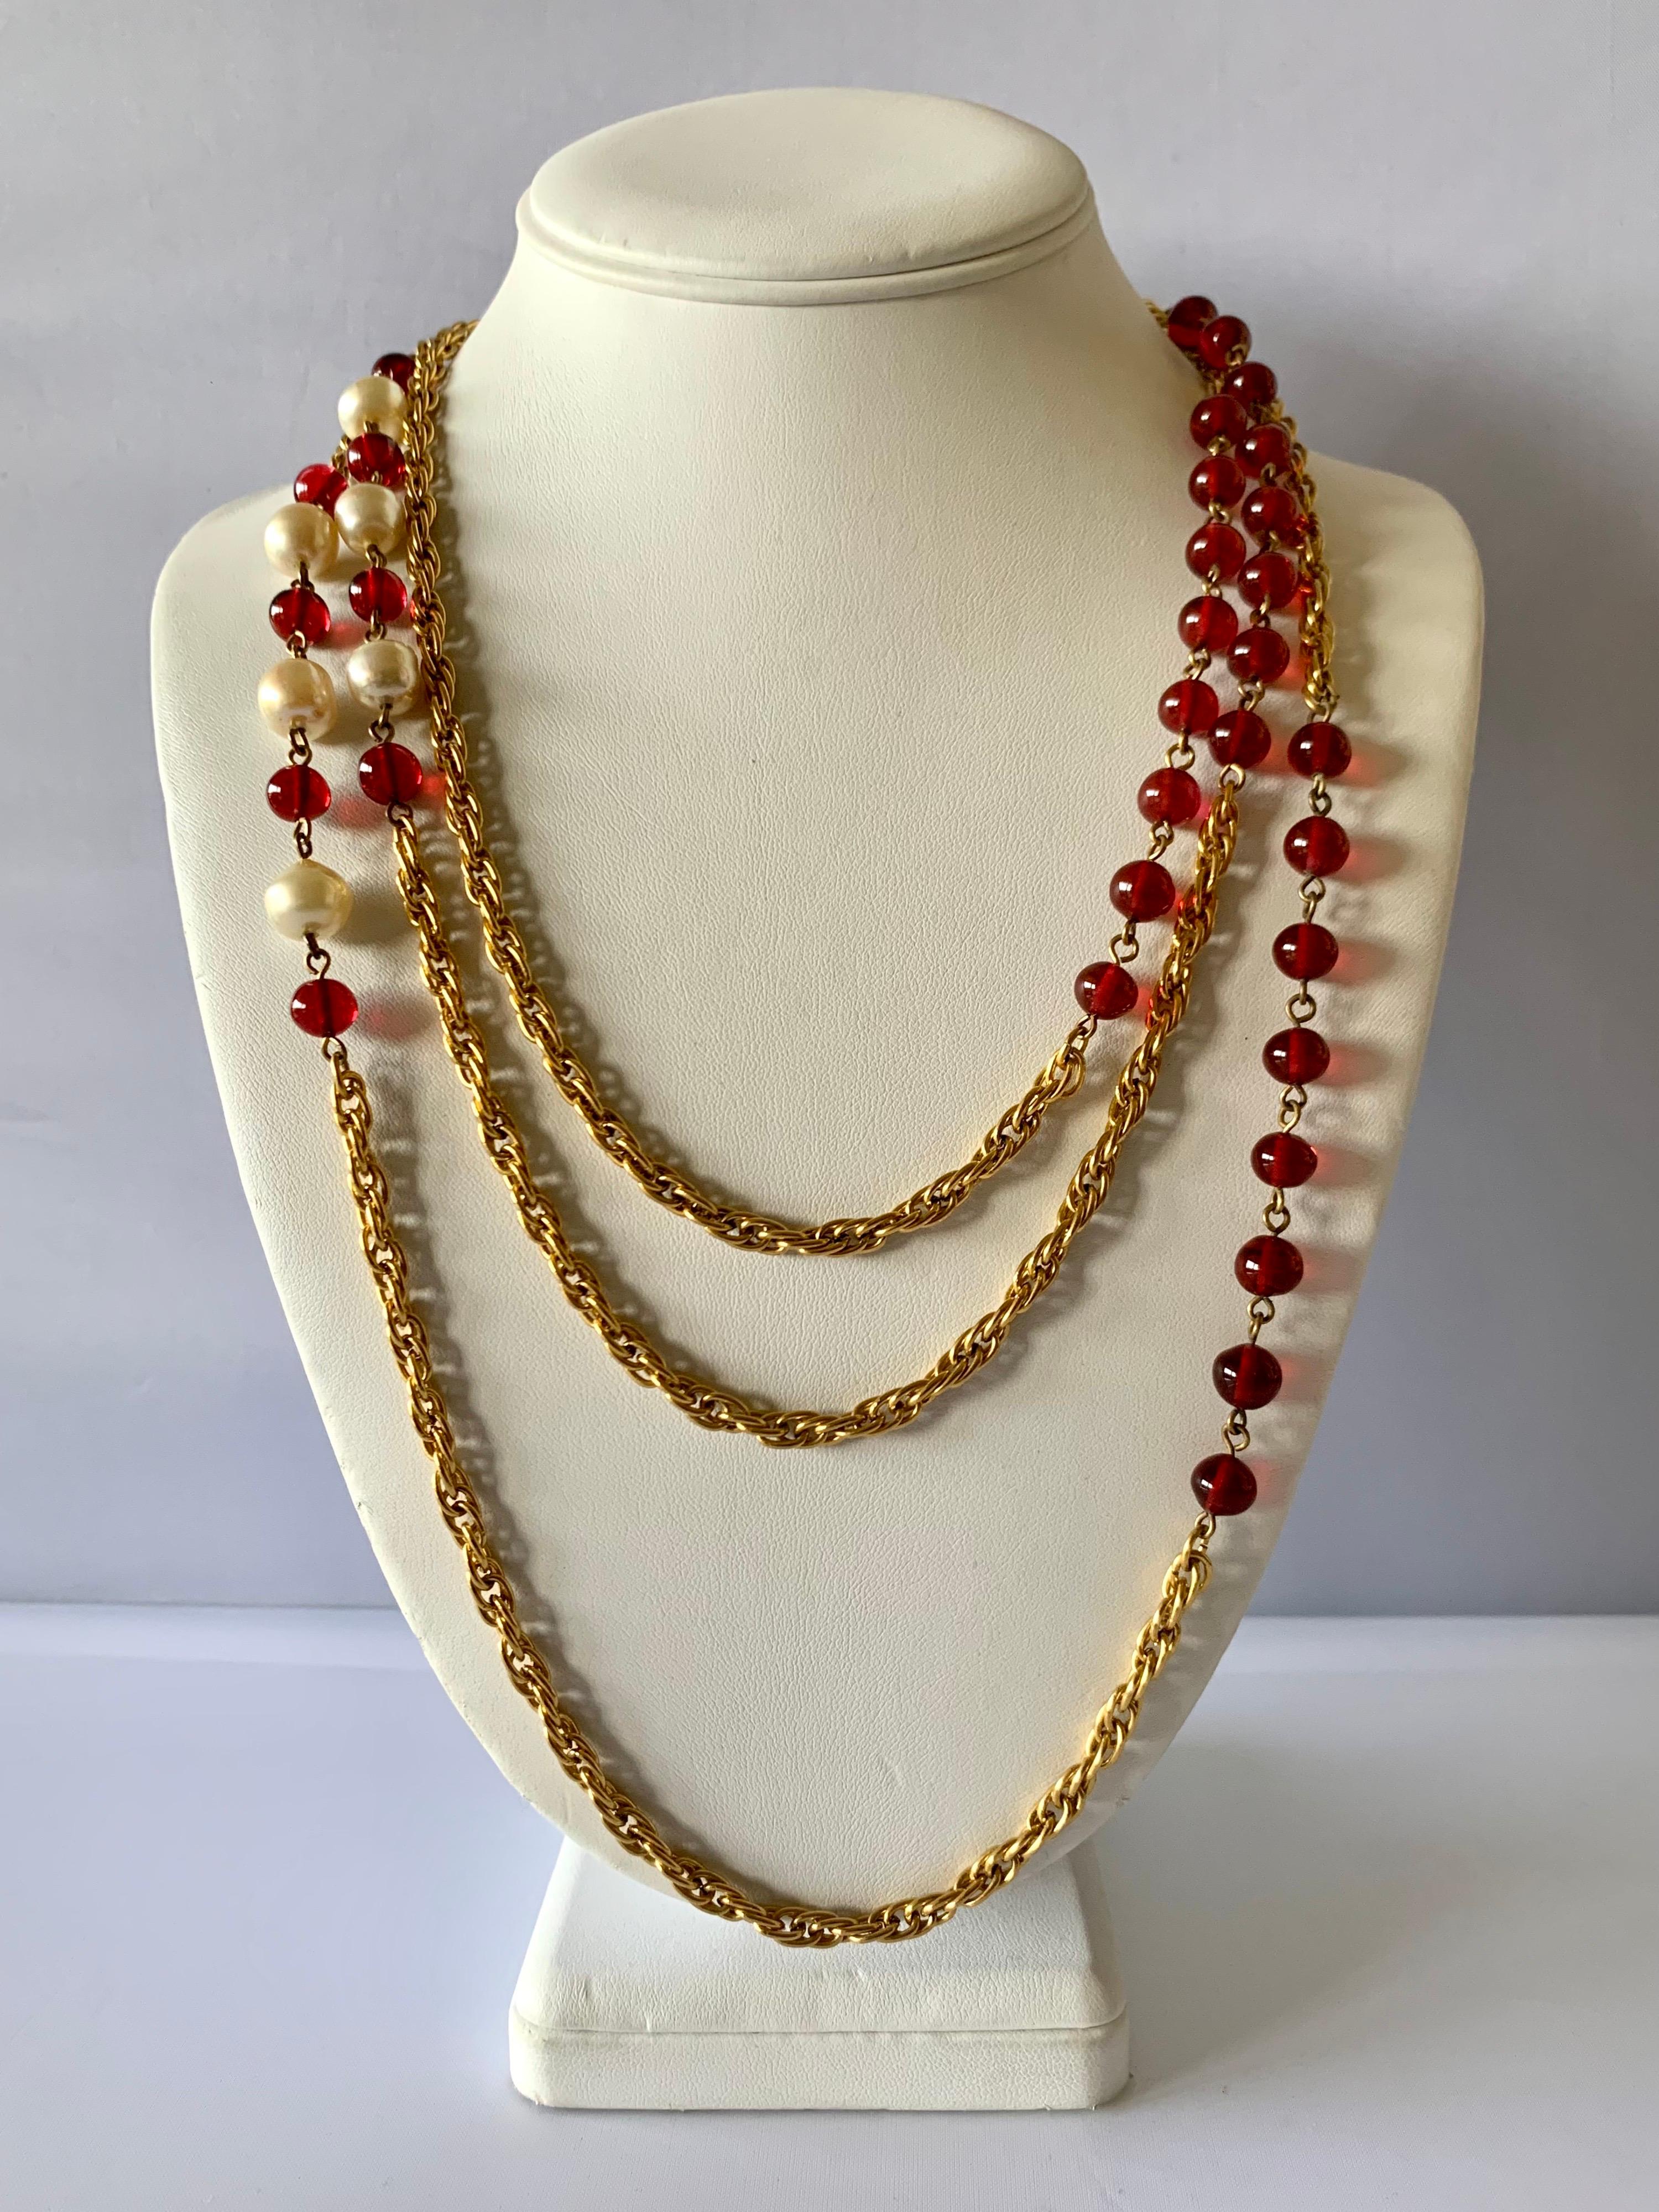 Vintage hard-to-find Chanel sautoir necklace, comprised out of gilt metal and adorned by glass pearls and red 